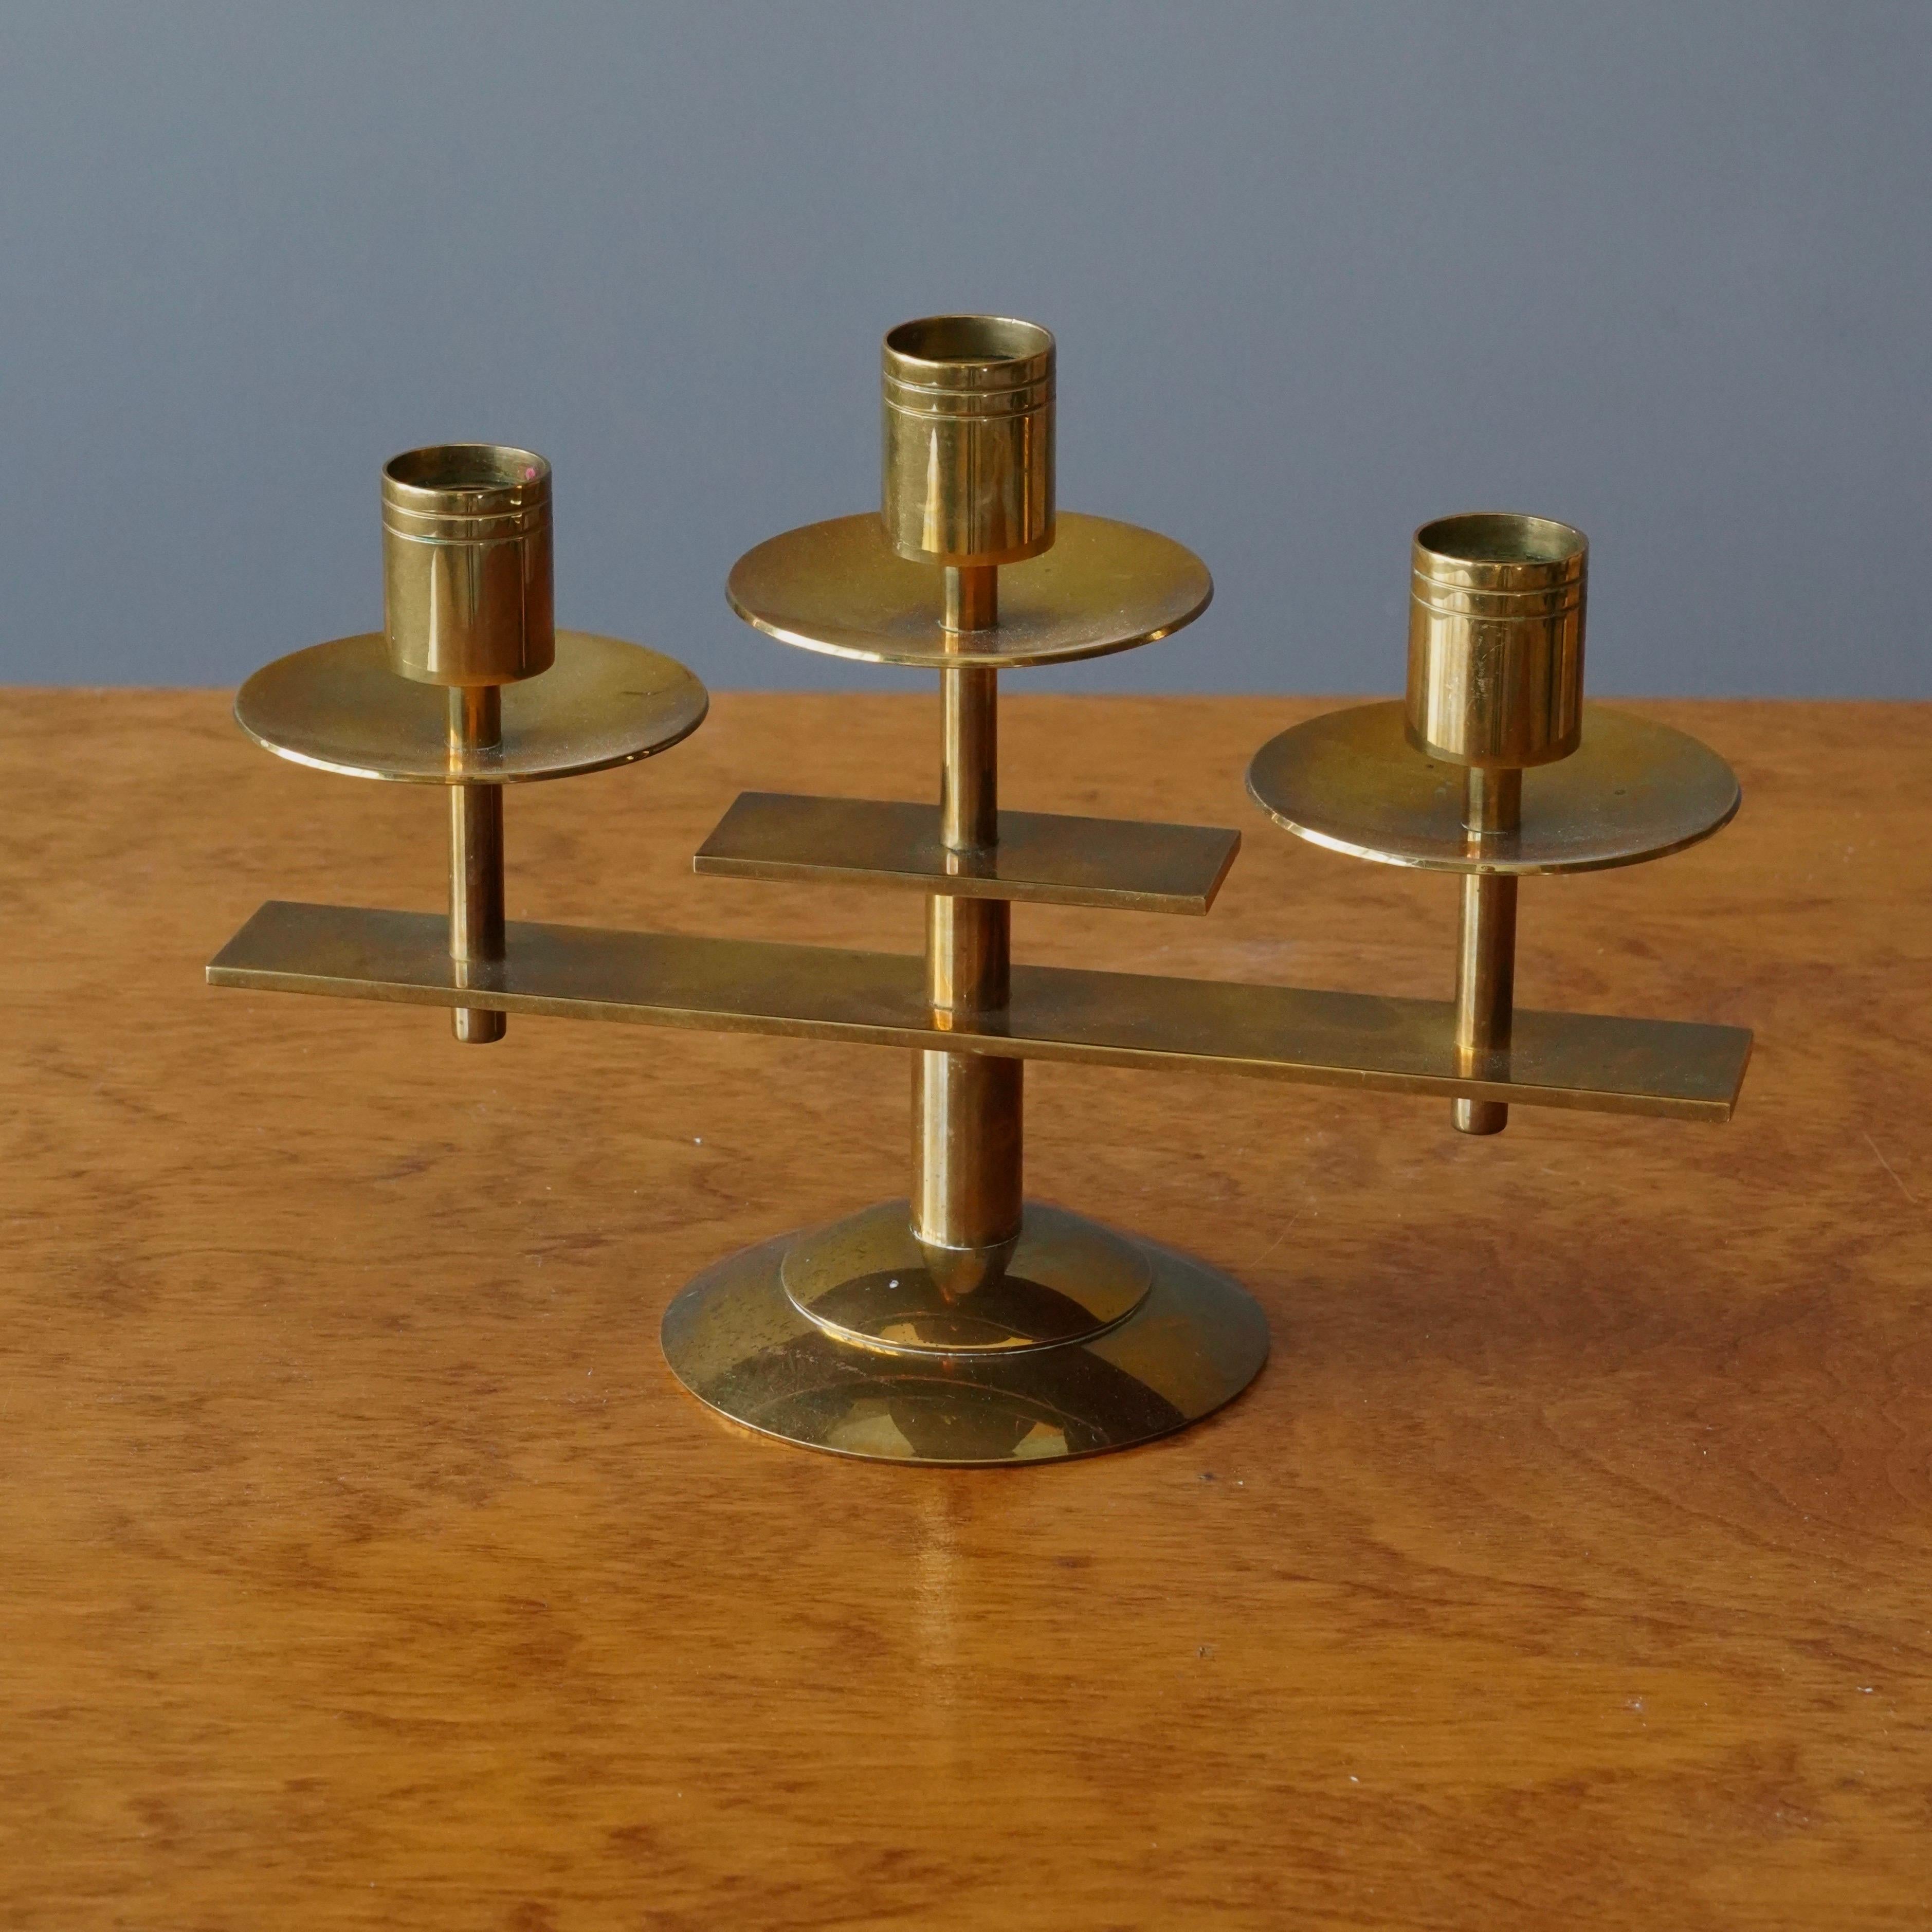 A Candelabra. Designed and produced by Dantorp, Denmark, 1960s. In brass.